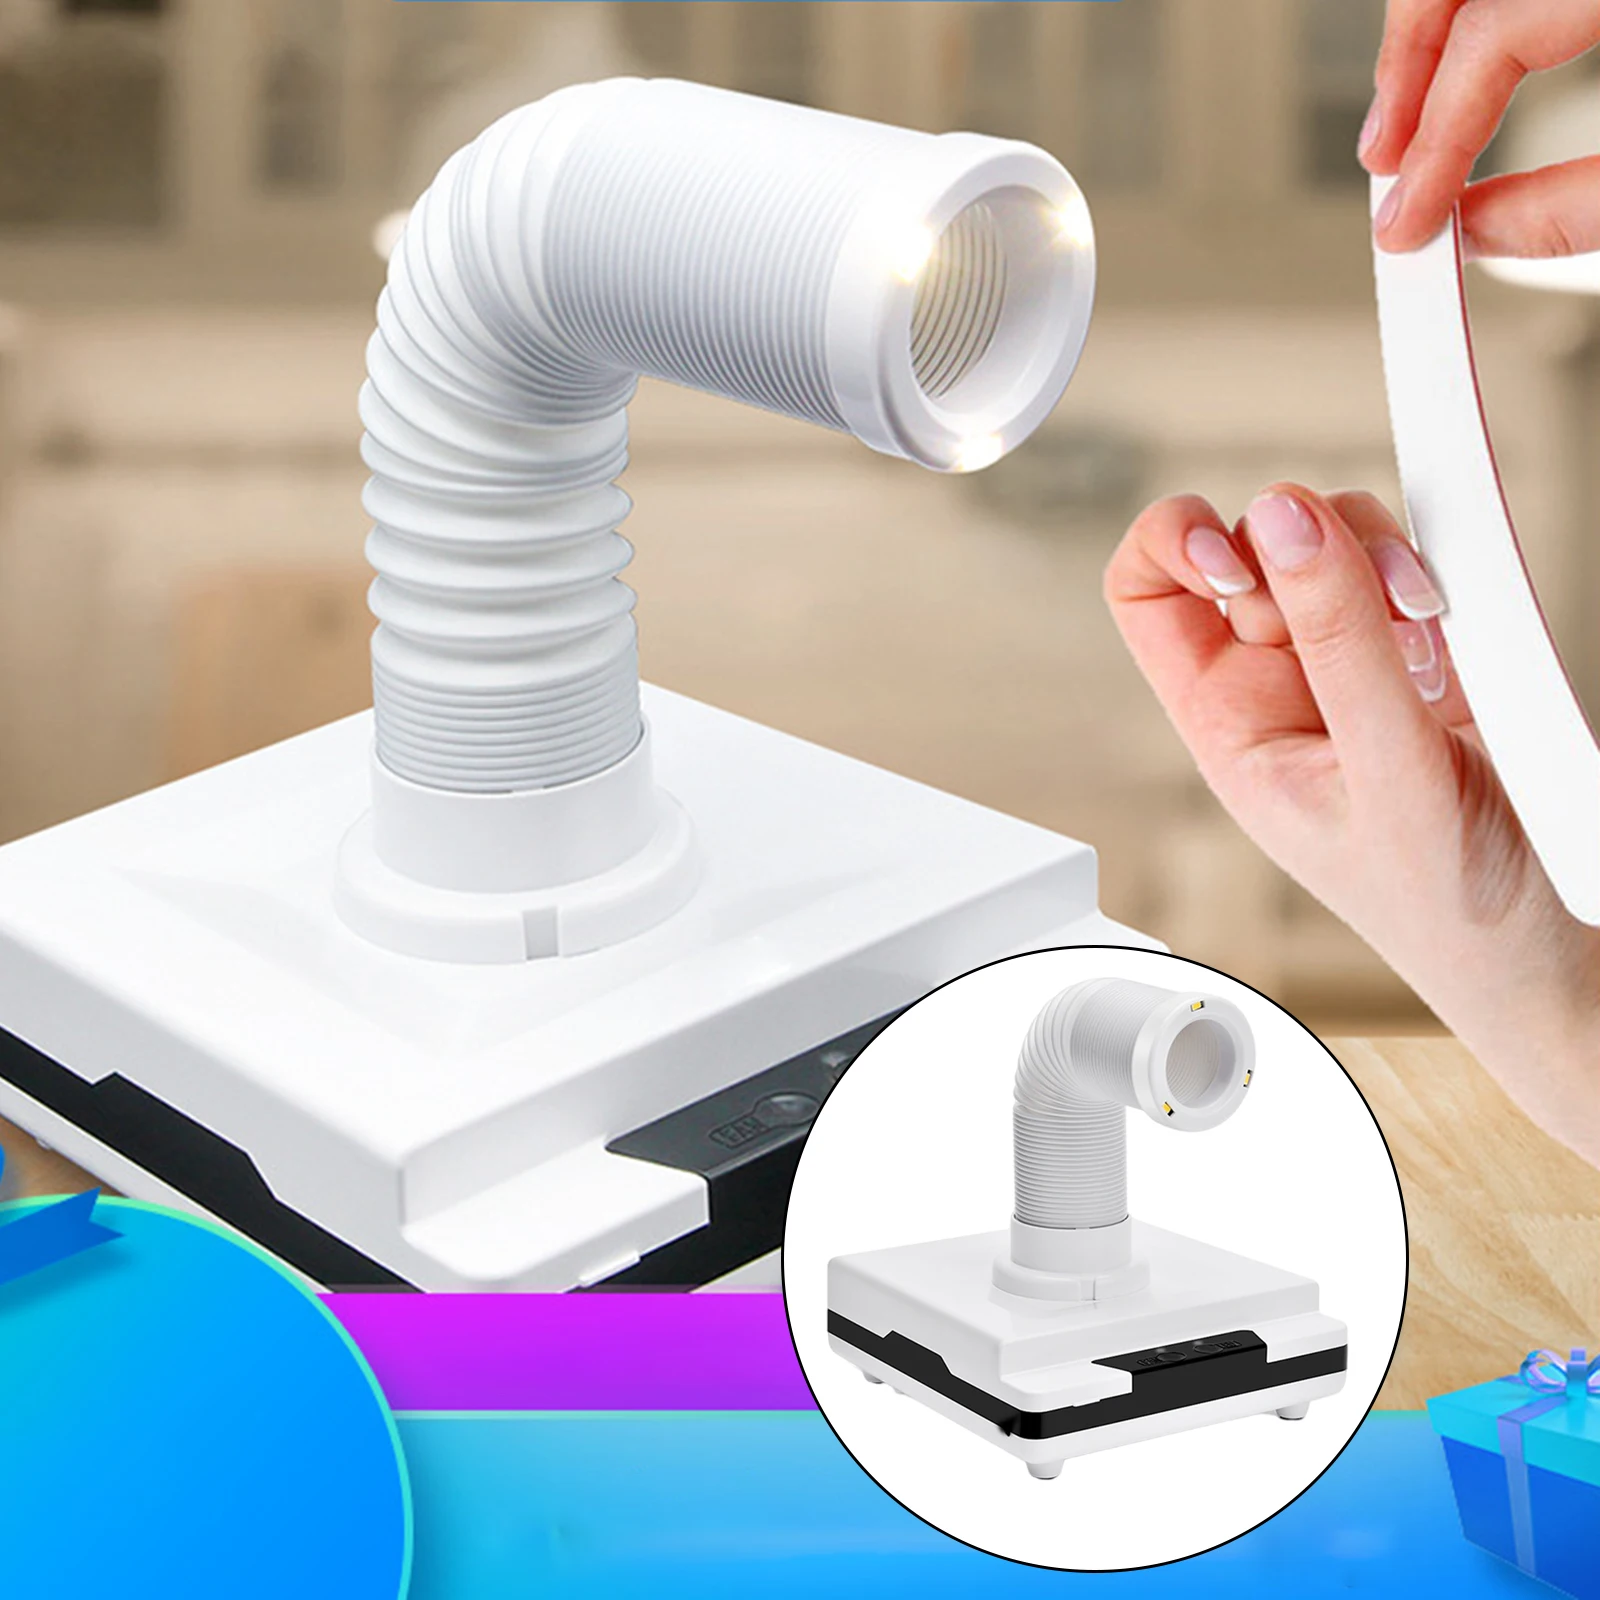 60W Nail Dust Collector Nails Fan Remover Machine with Light for Nail Drills 2 IN 1 Nail Dust Suction Collector Remover